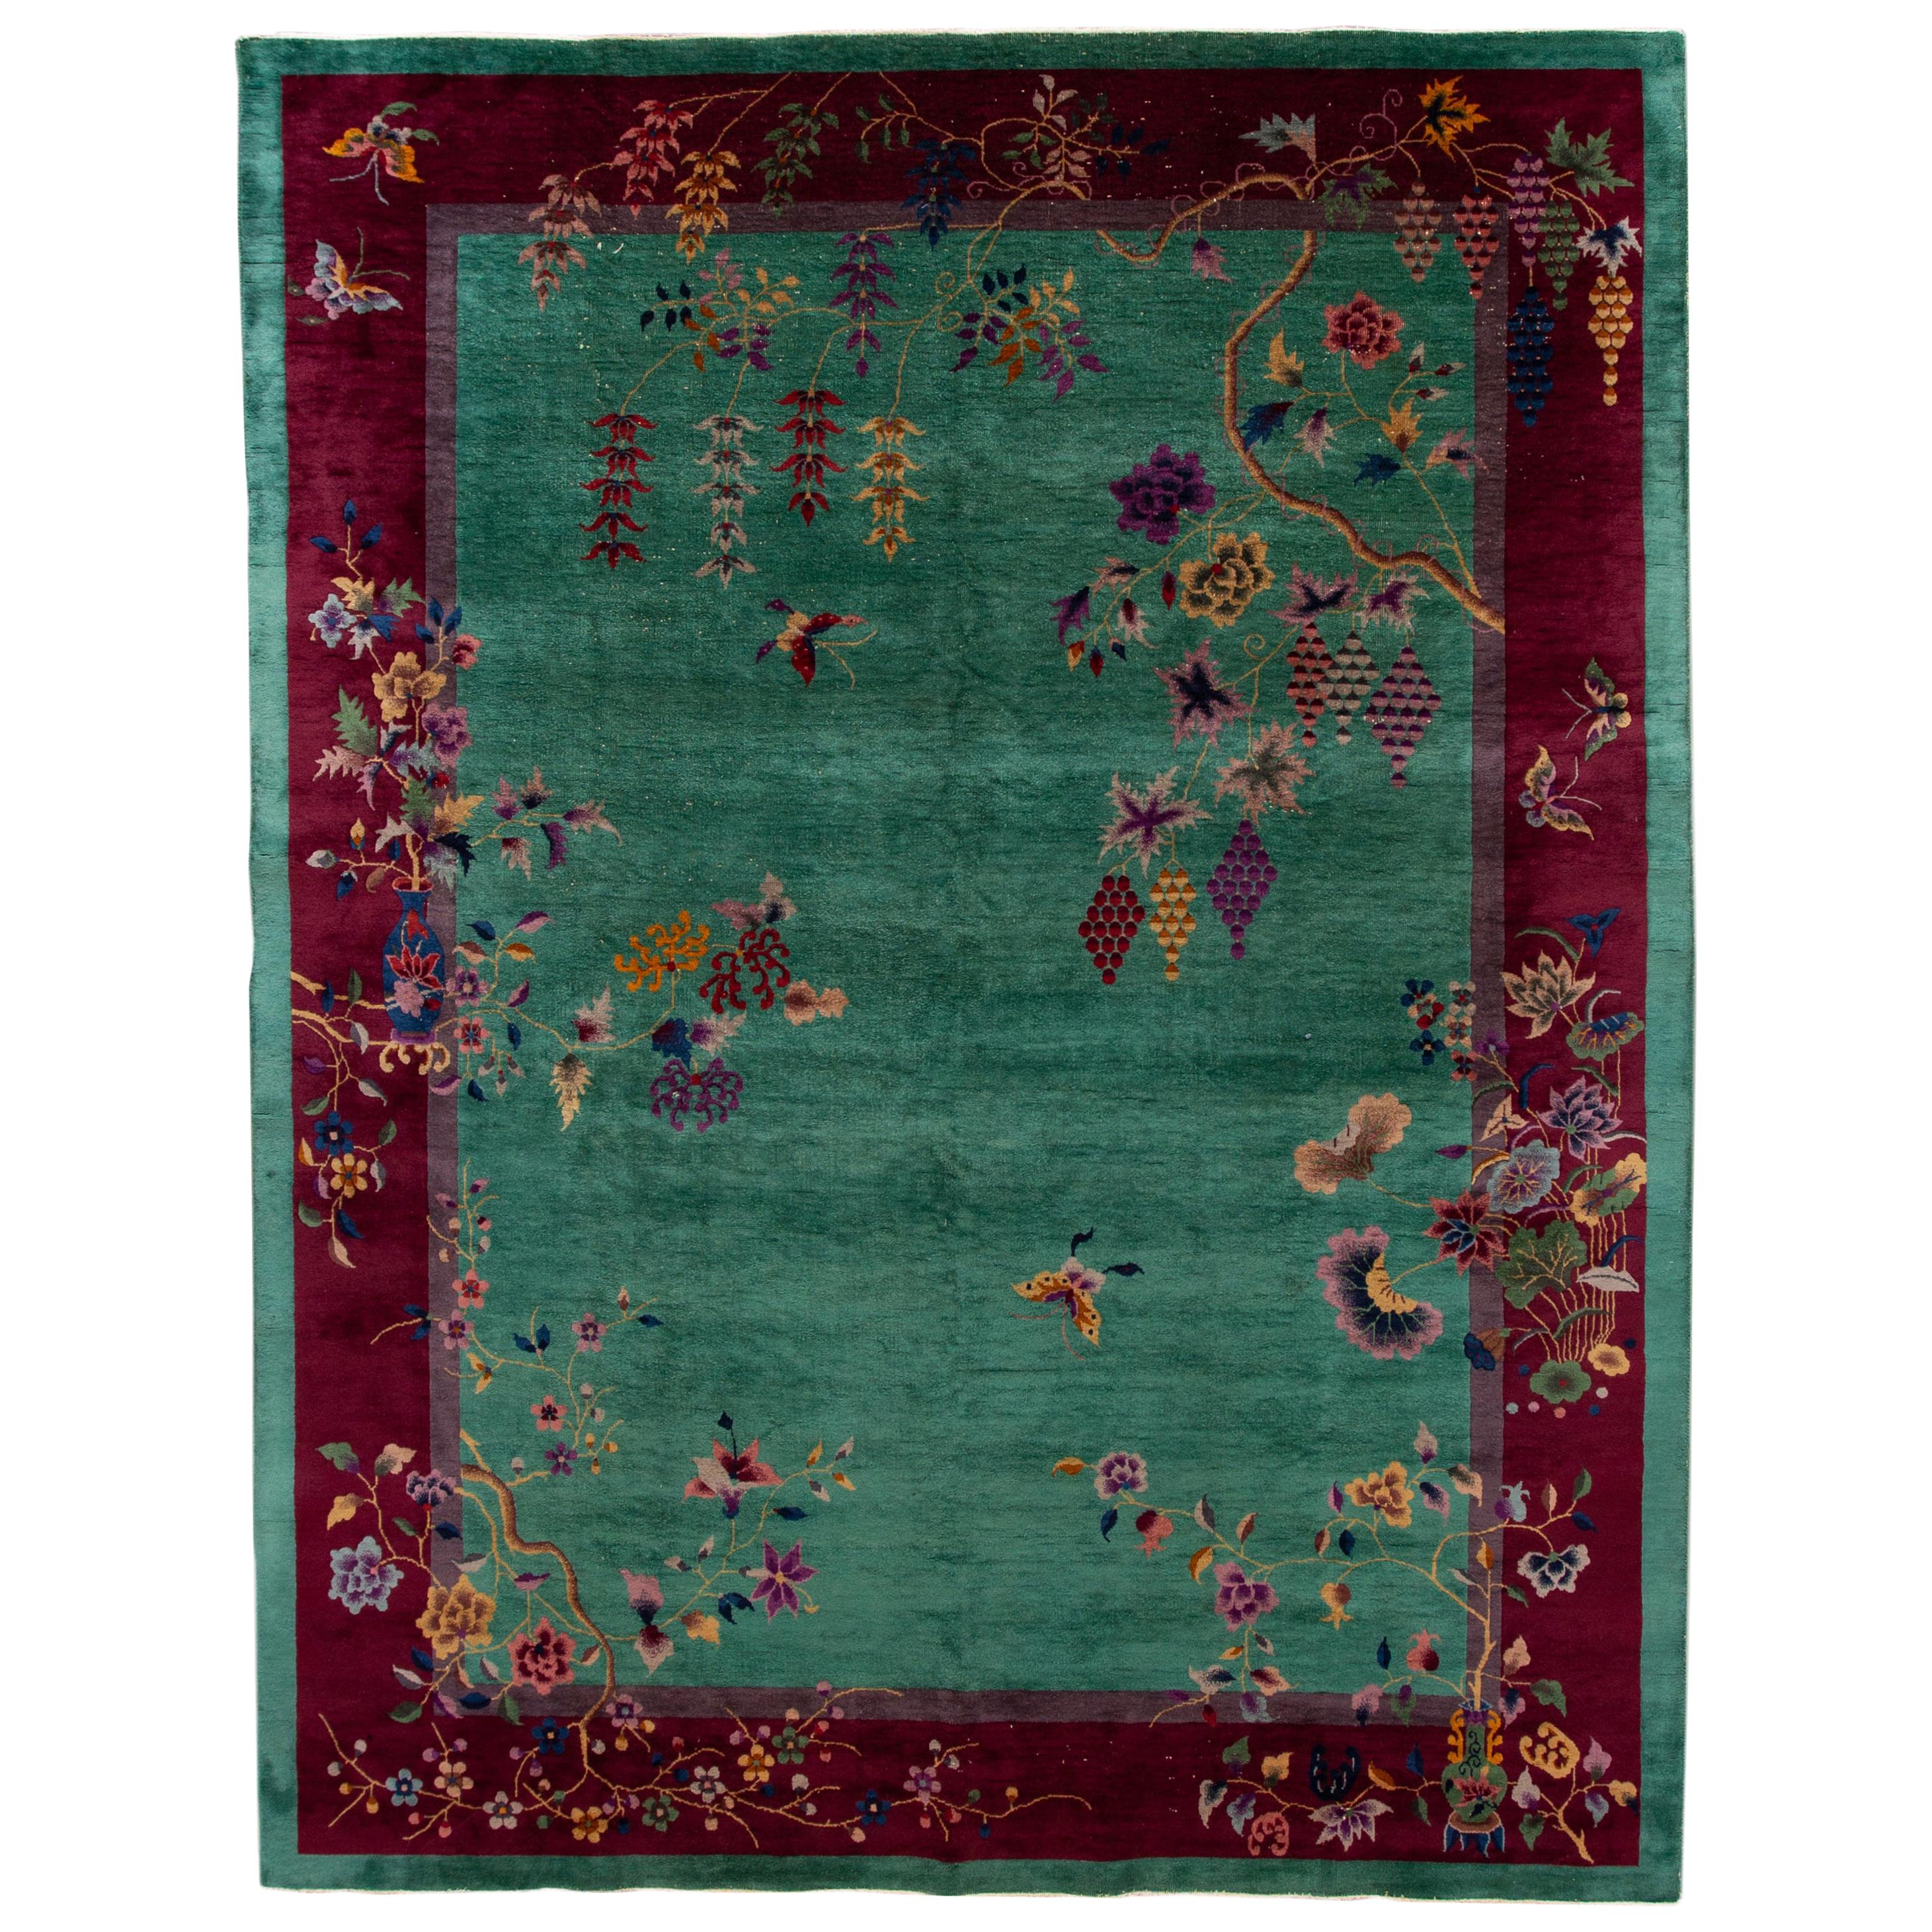 Antique Green Art Deco Chinese Wool Rug